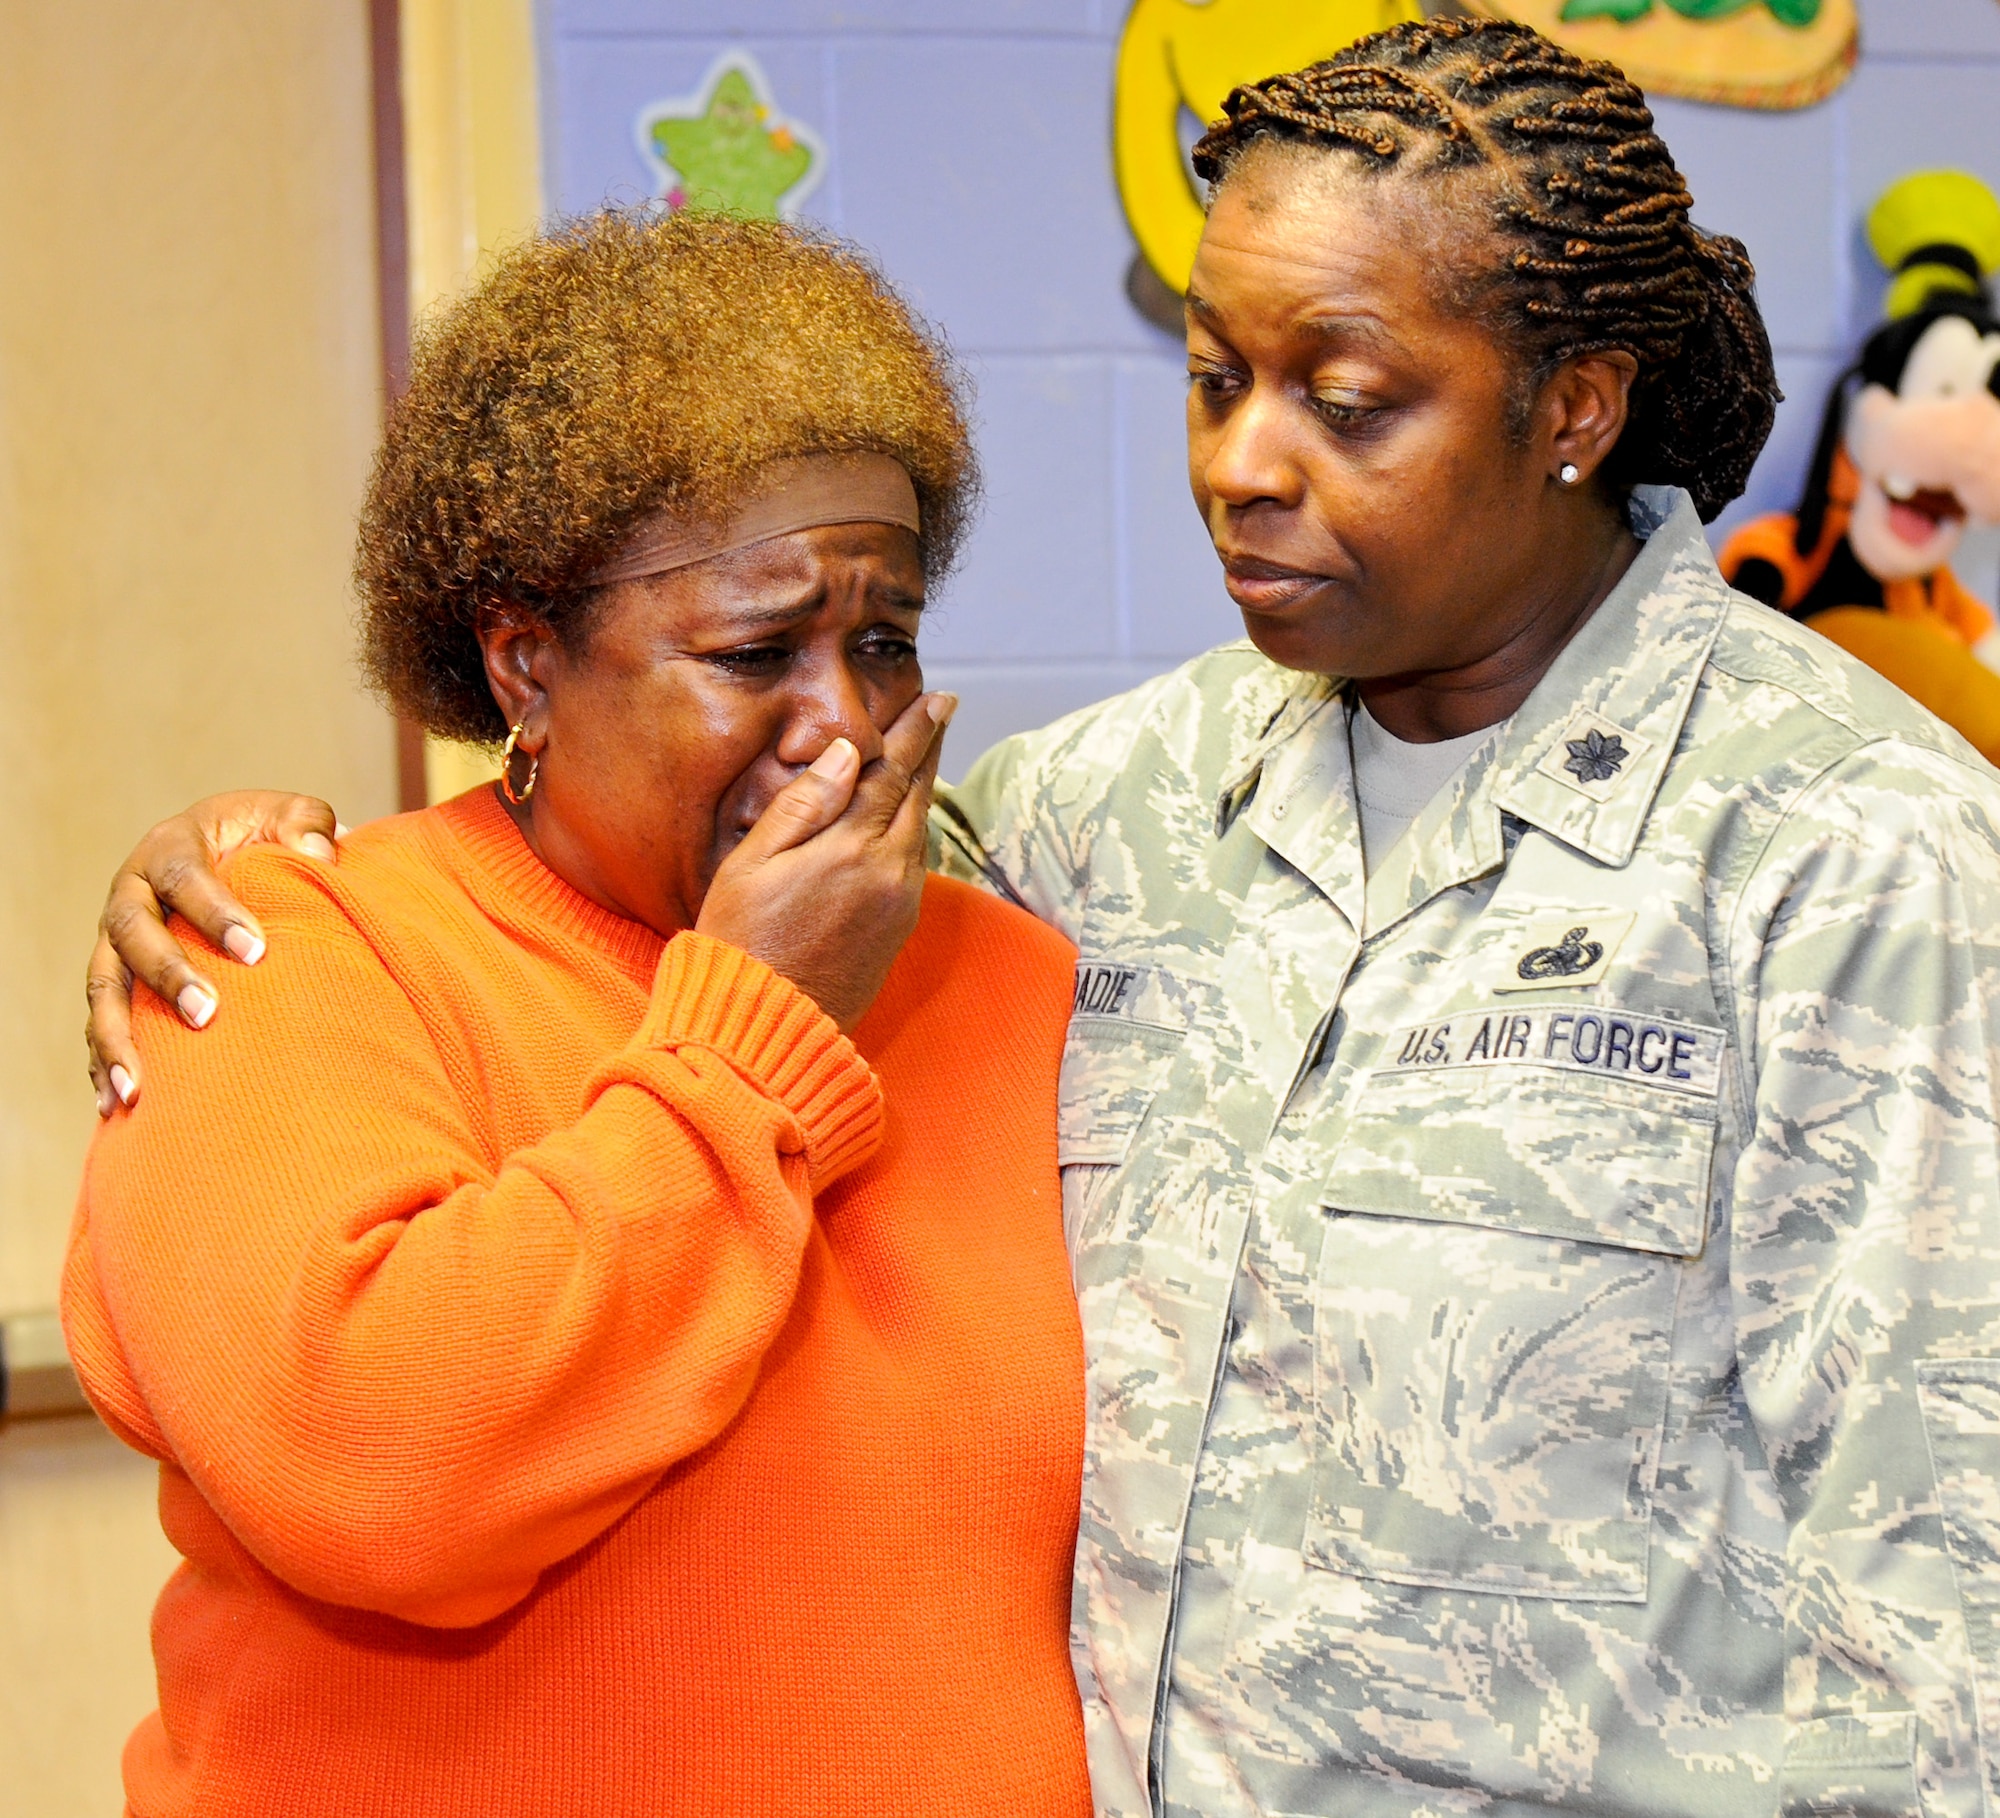 Lt. Col. Gwendolyn Badie, 116th Force Support Squadron commander, Robins Air Force Base, Ga., hugs Mary Harris after presenting her with a check from the Family-2-Family project at Pearl Stephens Elementary school, Warner Robins, Ga., Dec. 9, 2011.  The annual project, coordinated by the 116th and 461st Air Control Wings, provides food and toys to community and military families for the holidays.  A special donation was given to Harris to help with expenses incurred when she lost her home during a fire.  (National Guard photo by Master Sgt. Roger Parsons/Released)